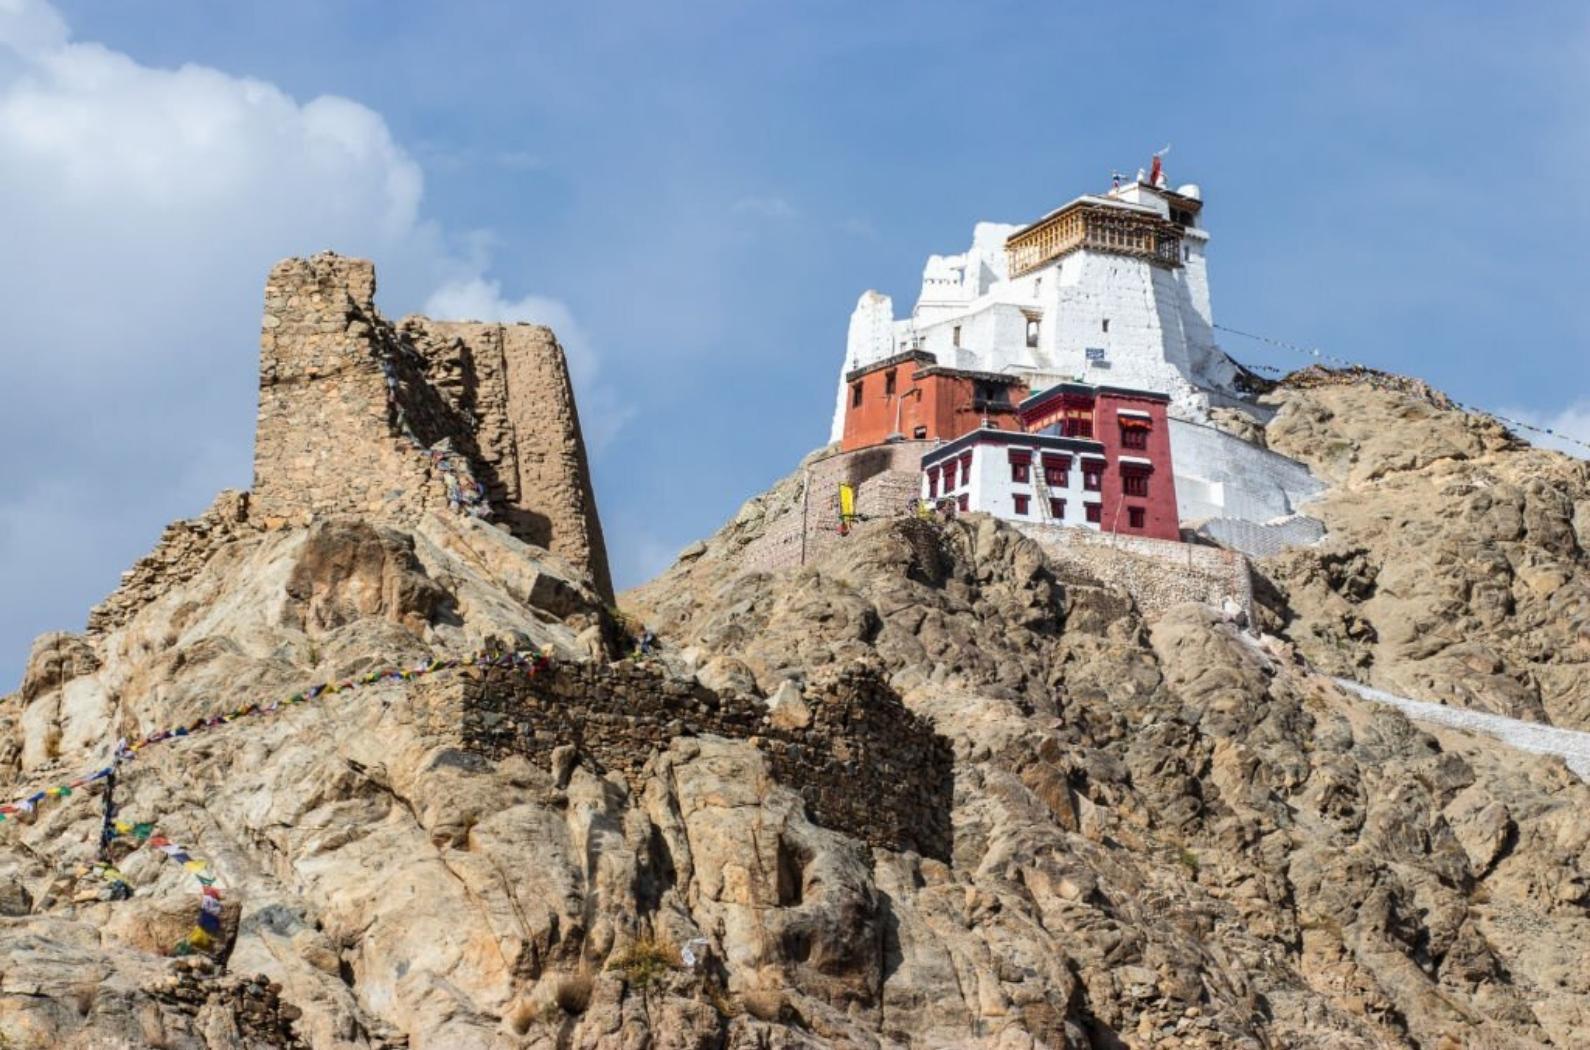 Namgyal Tsemo Gompa on the cliff with blue sky.